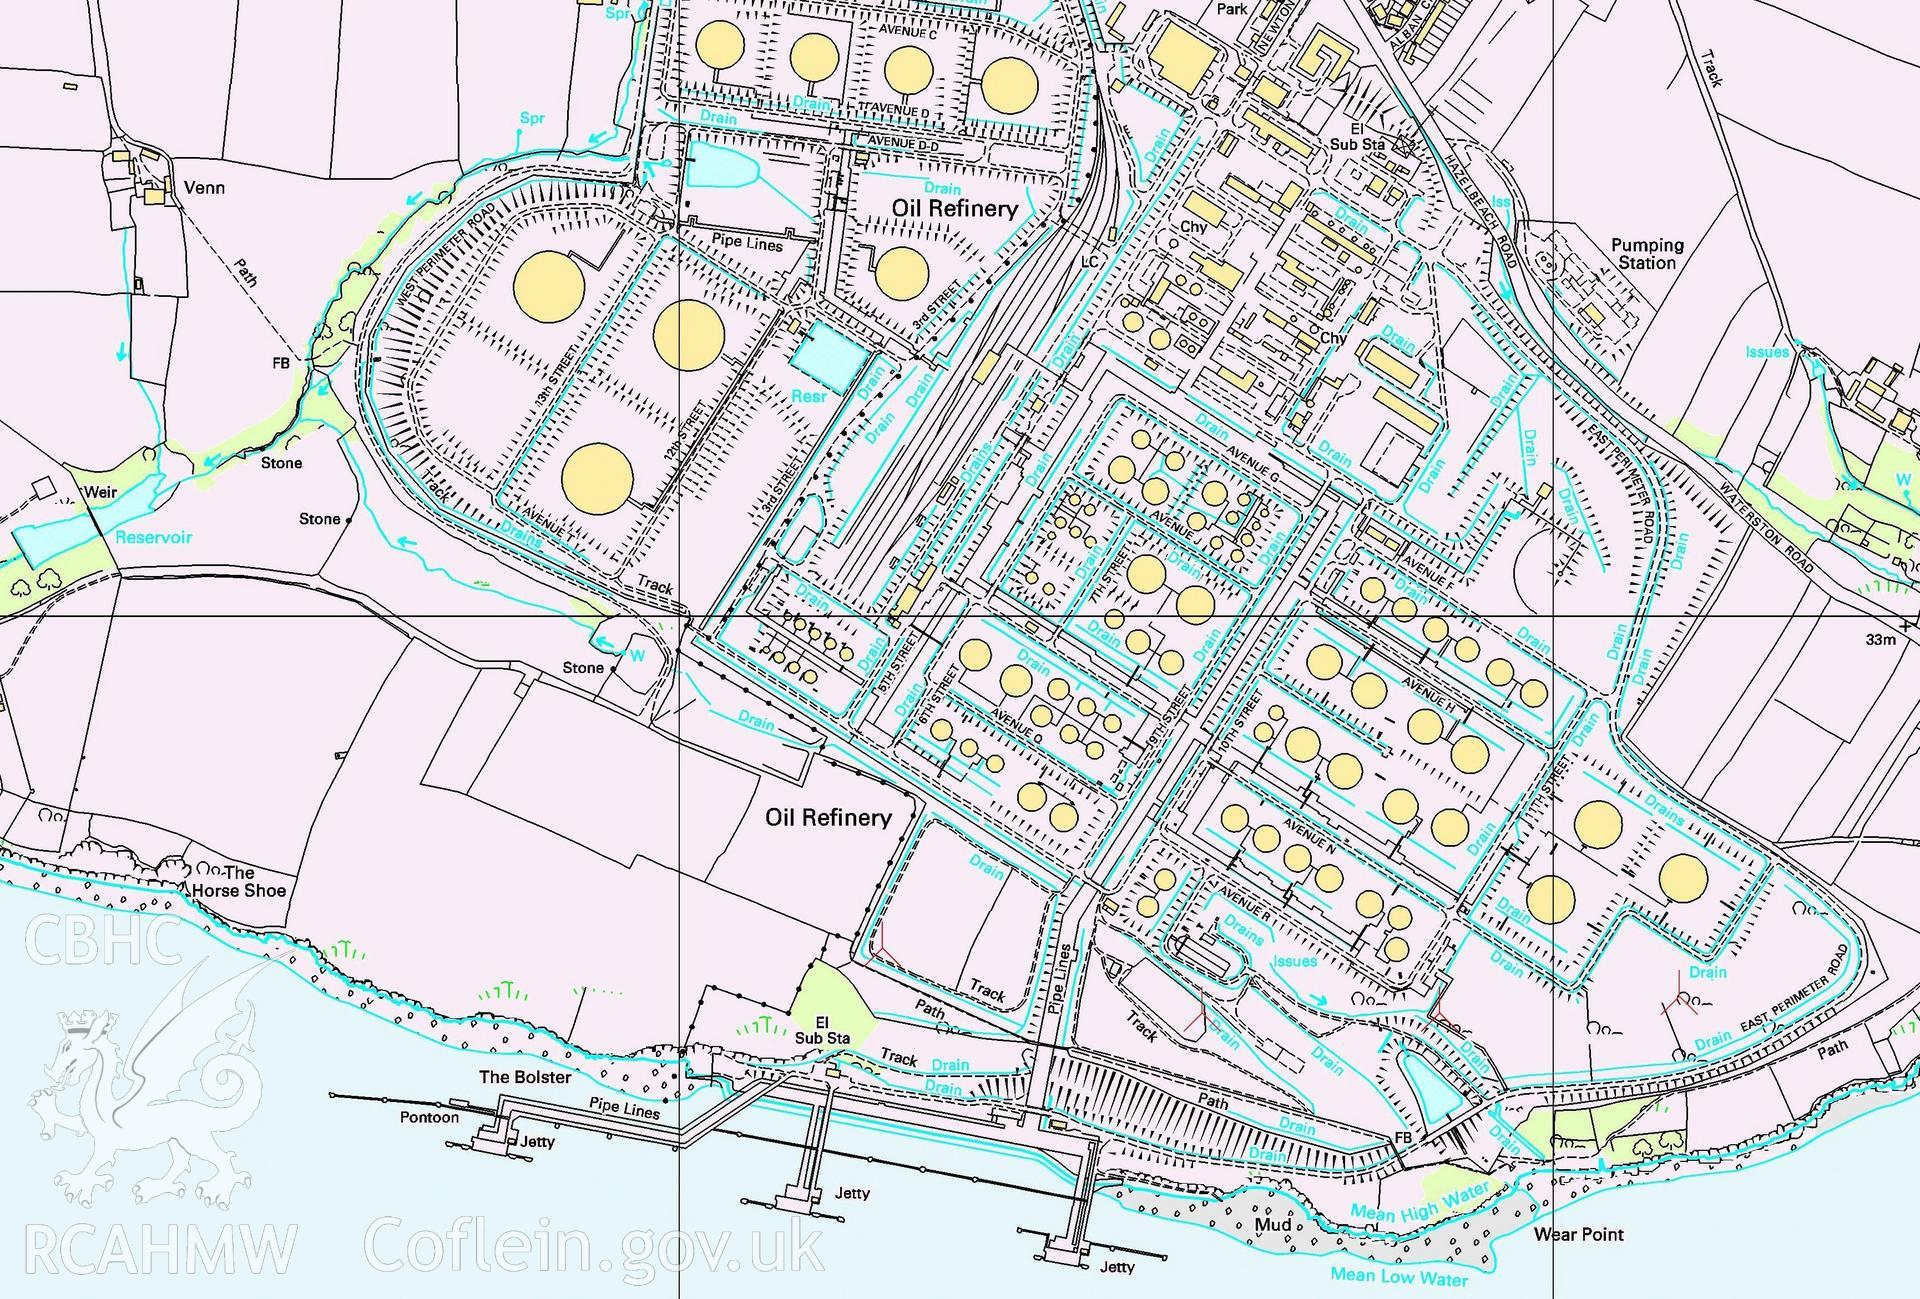 Digital copy of a map showing the site layout.